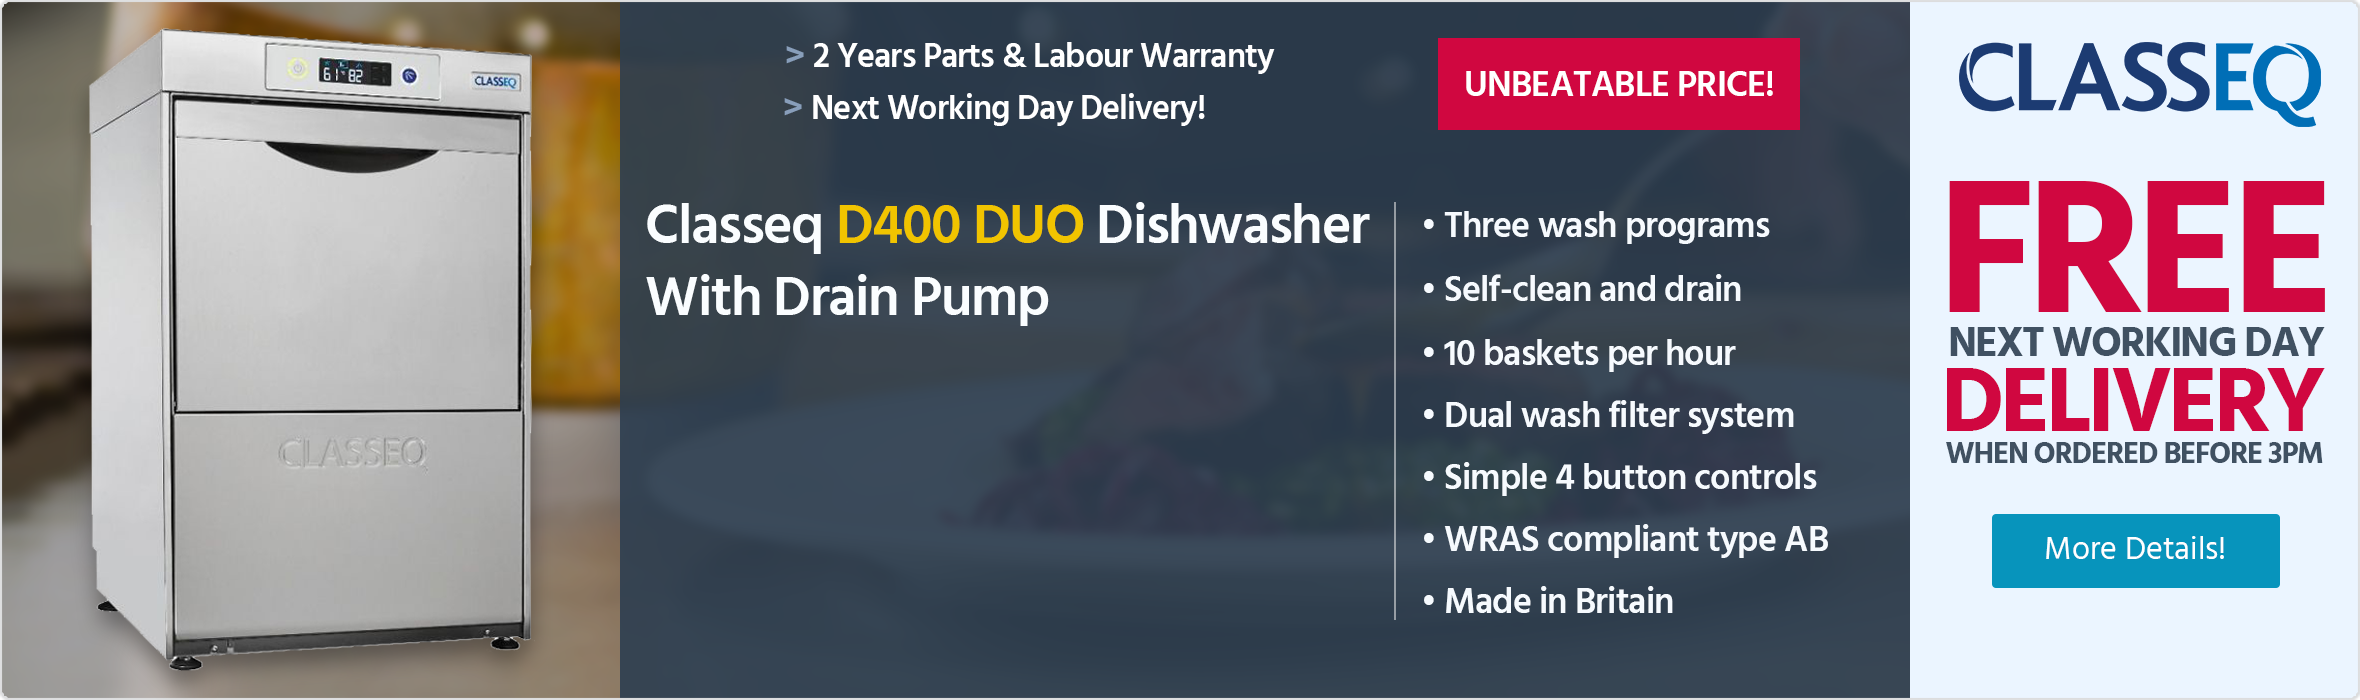 Classeq D400 DUO (DUO400) 400mm 11 Plate Dishwasher With Drain Pump